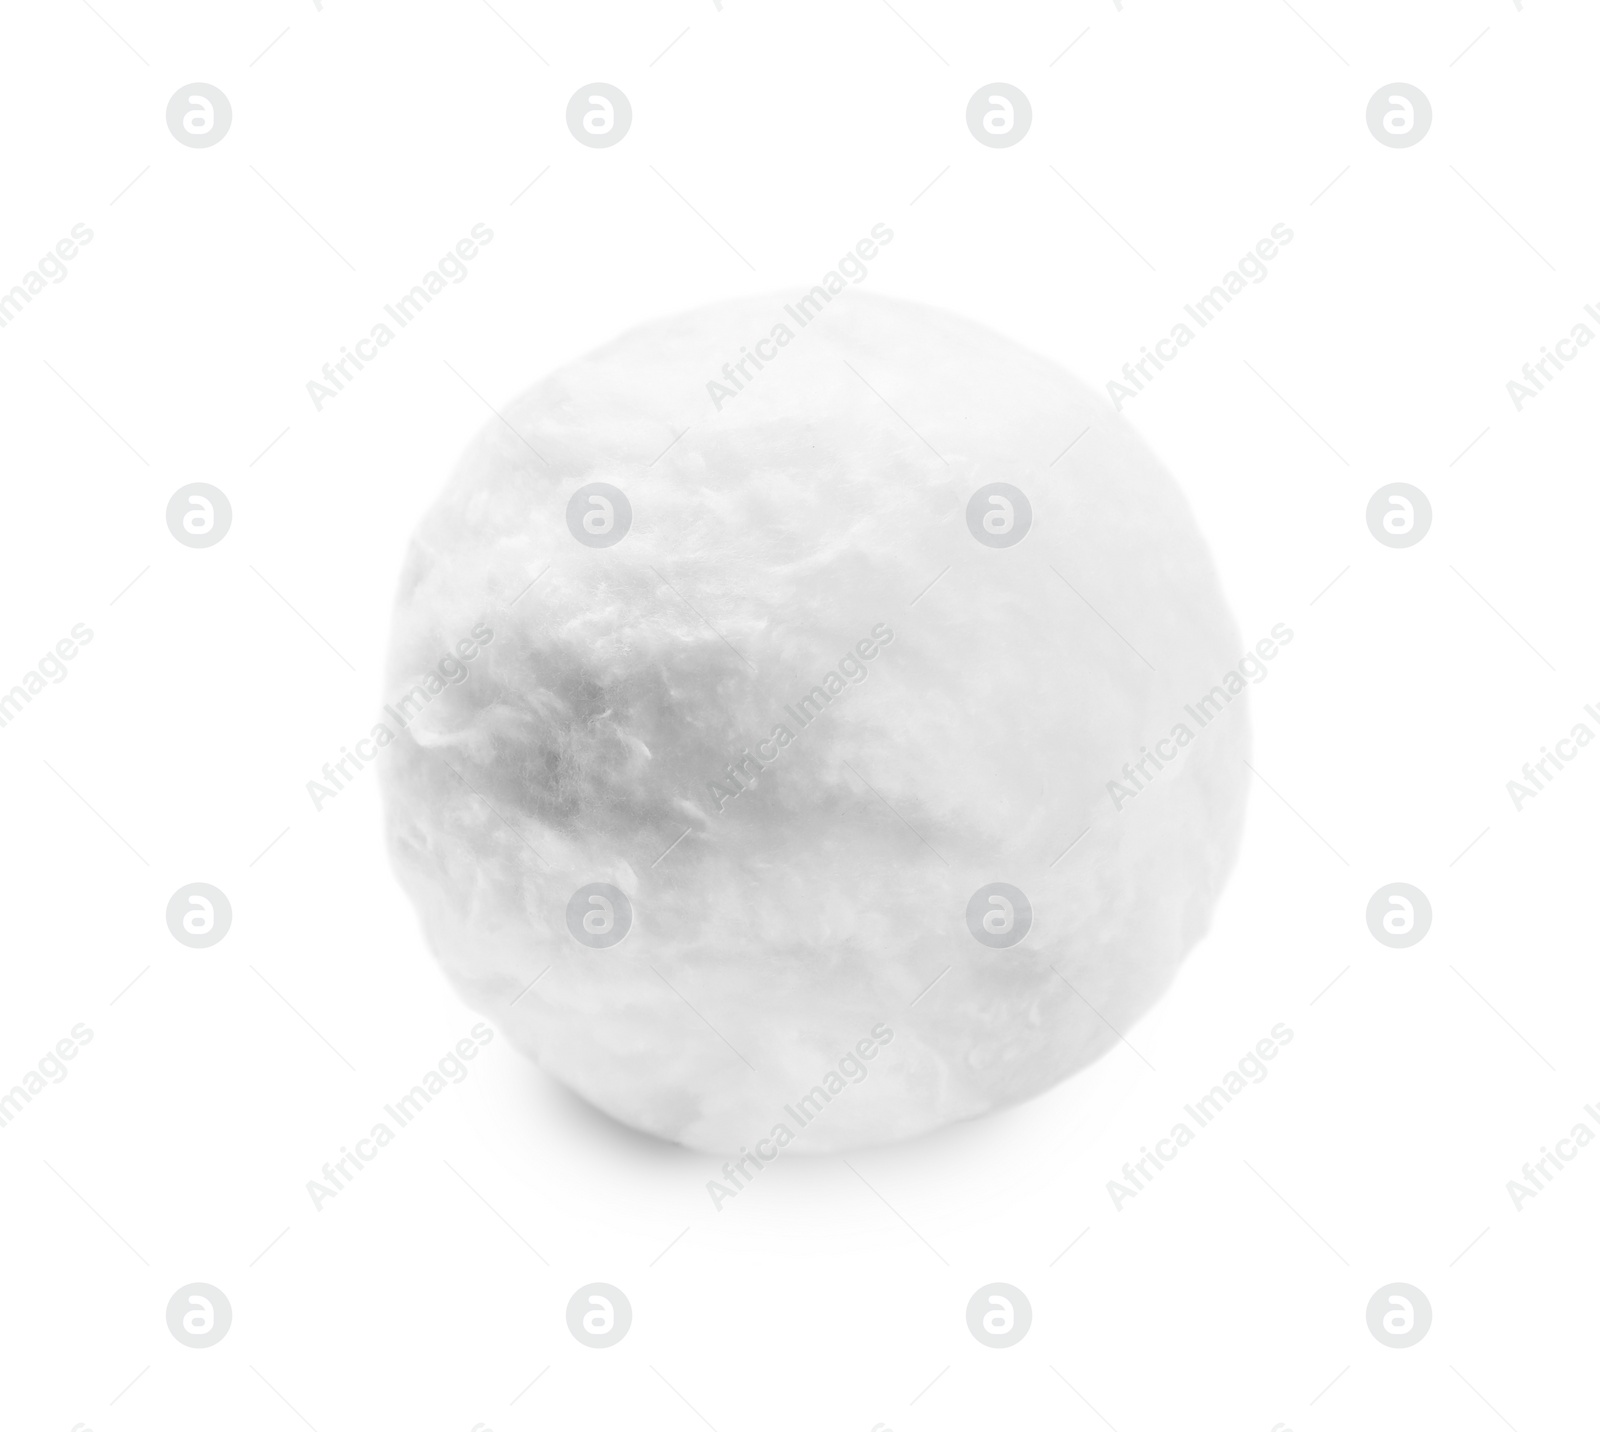 Photo of Ball of clean cotton wool isolated on white